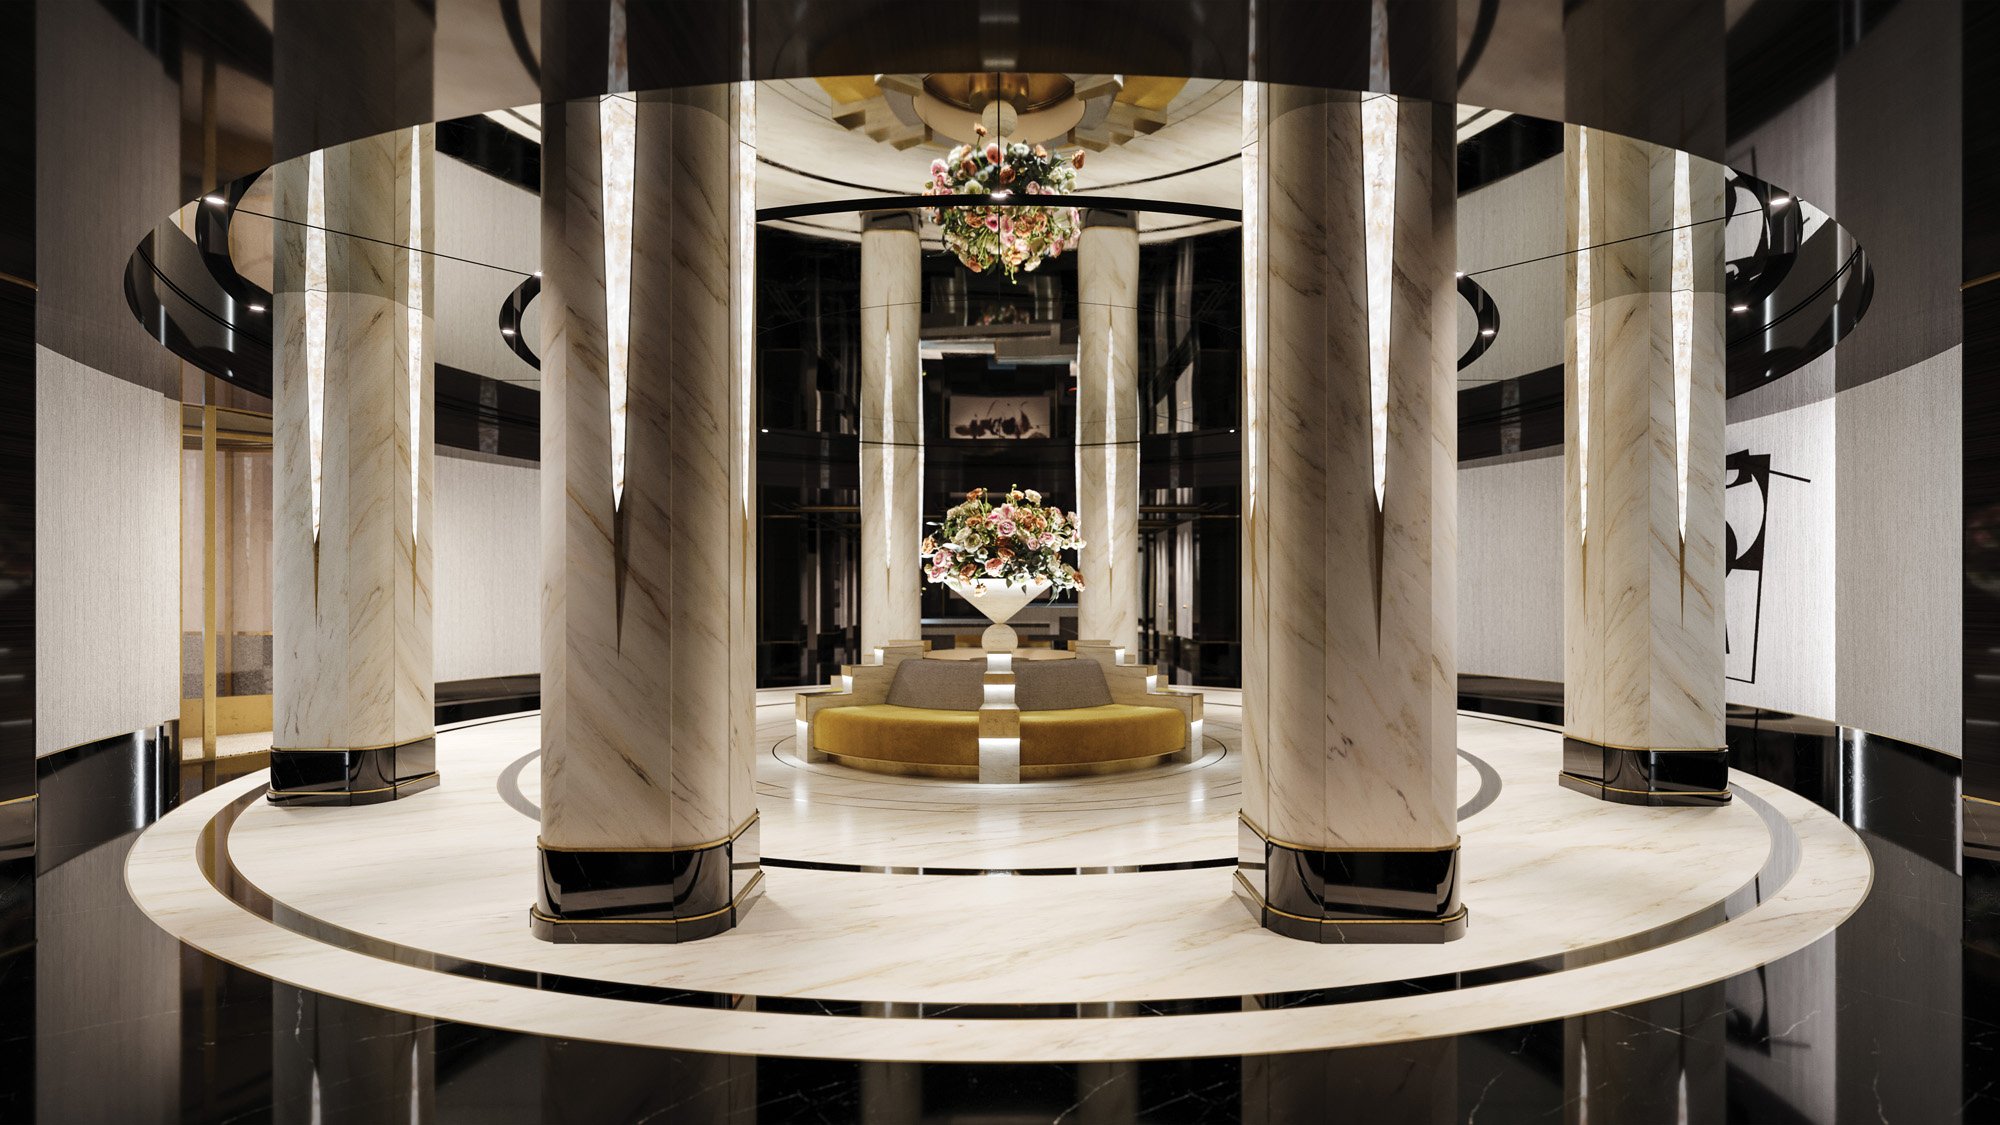 Waldorf Astoria Residential Lobby Featuring Marble Floors and Columns